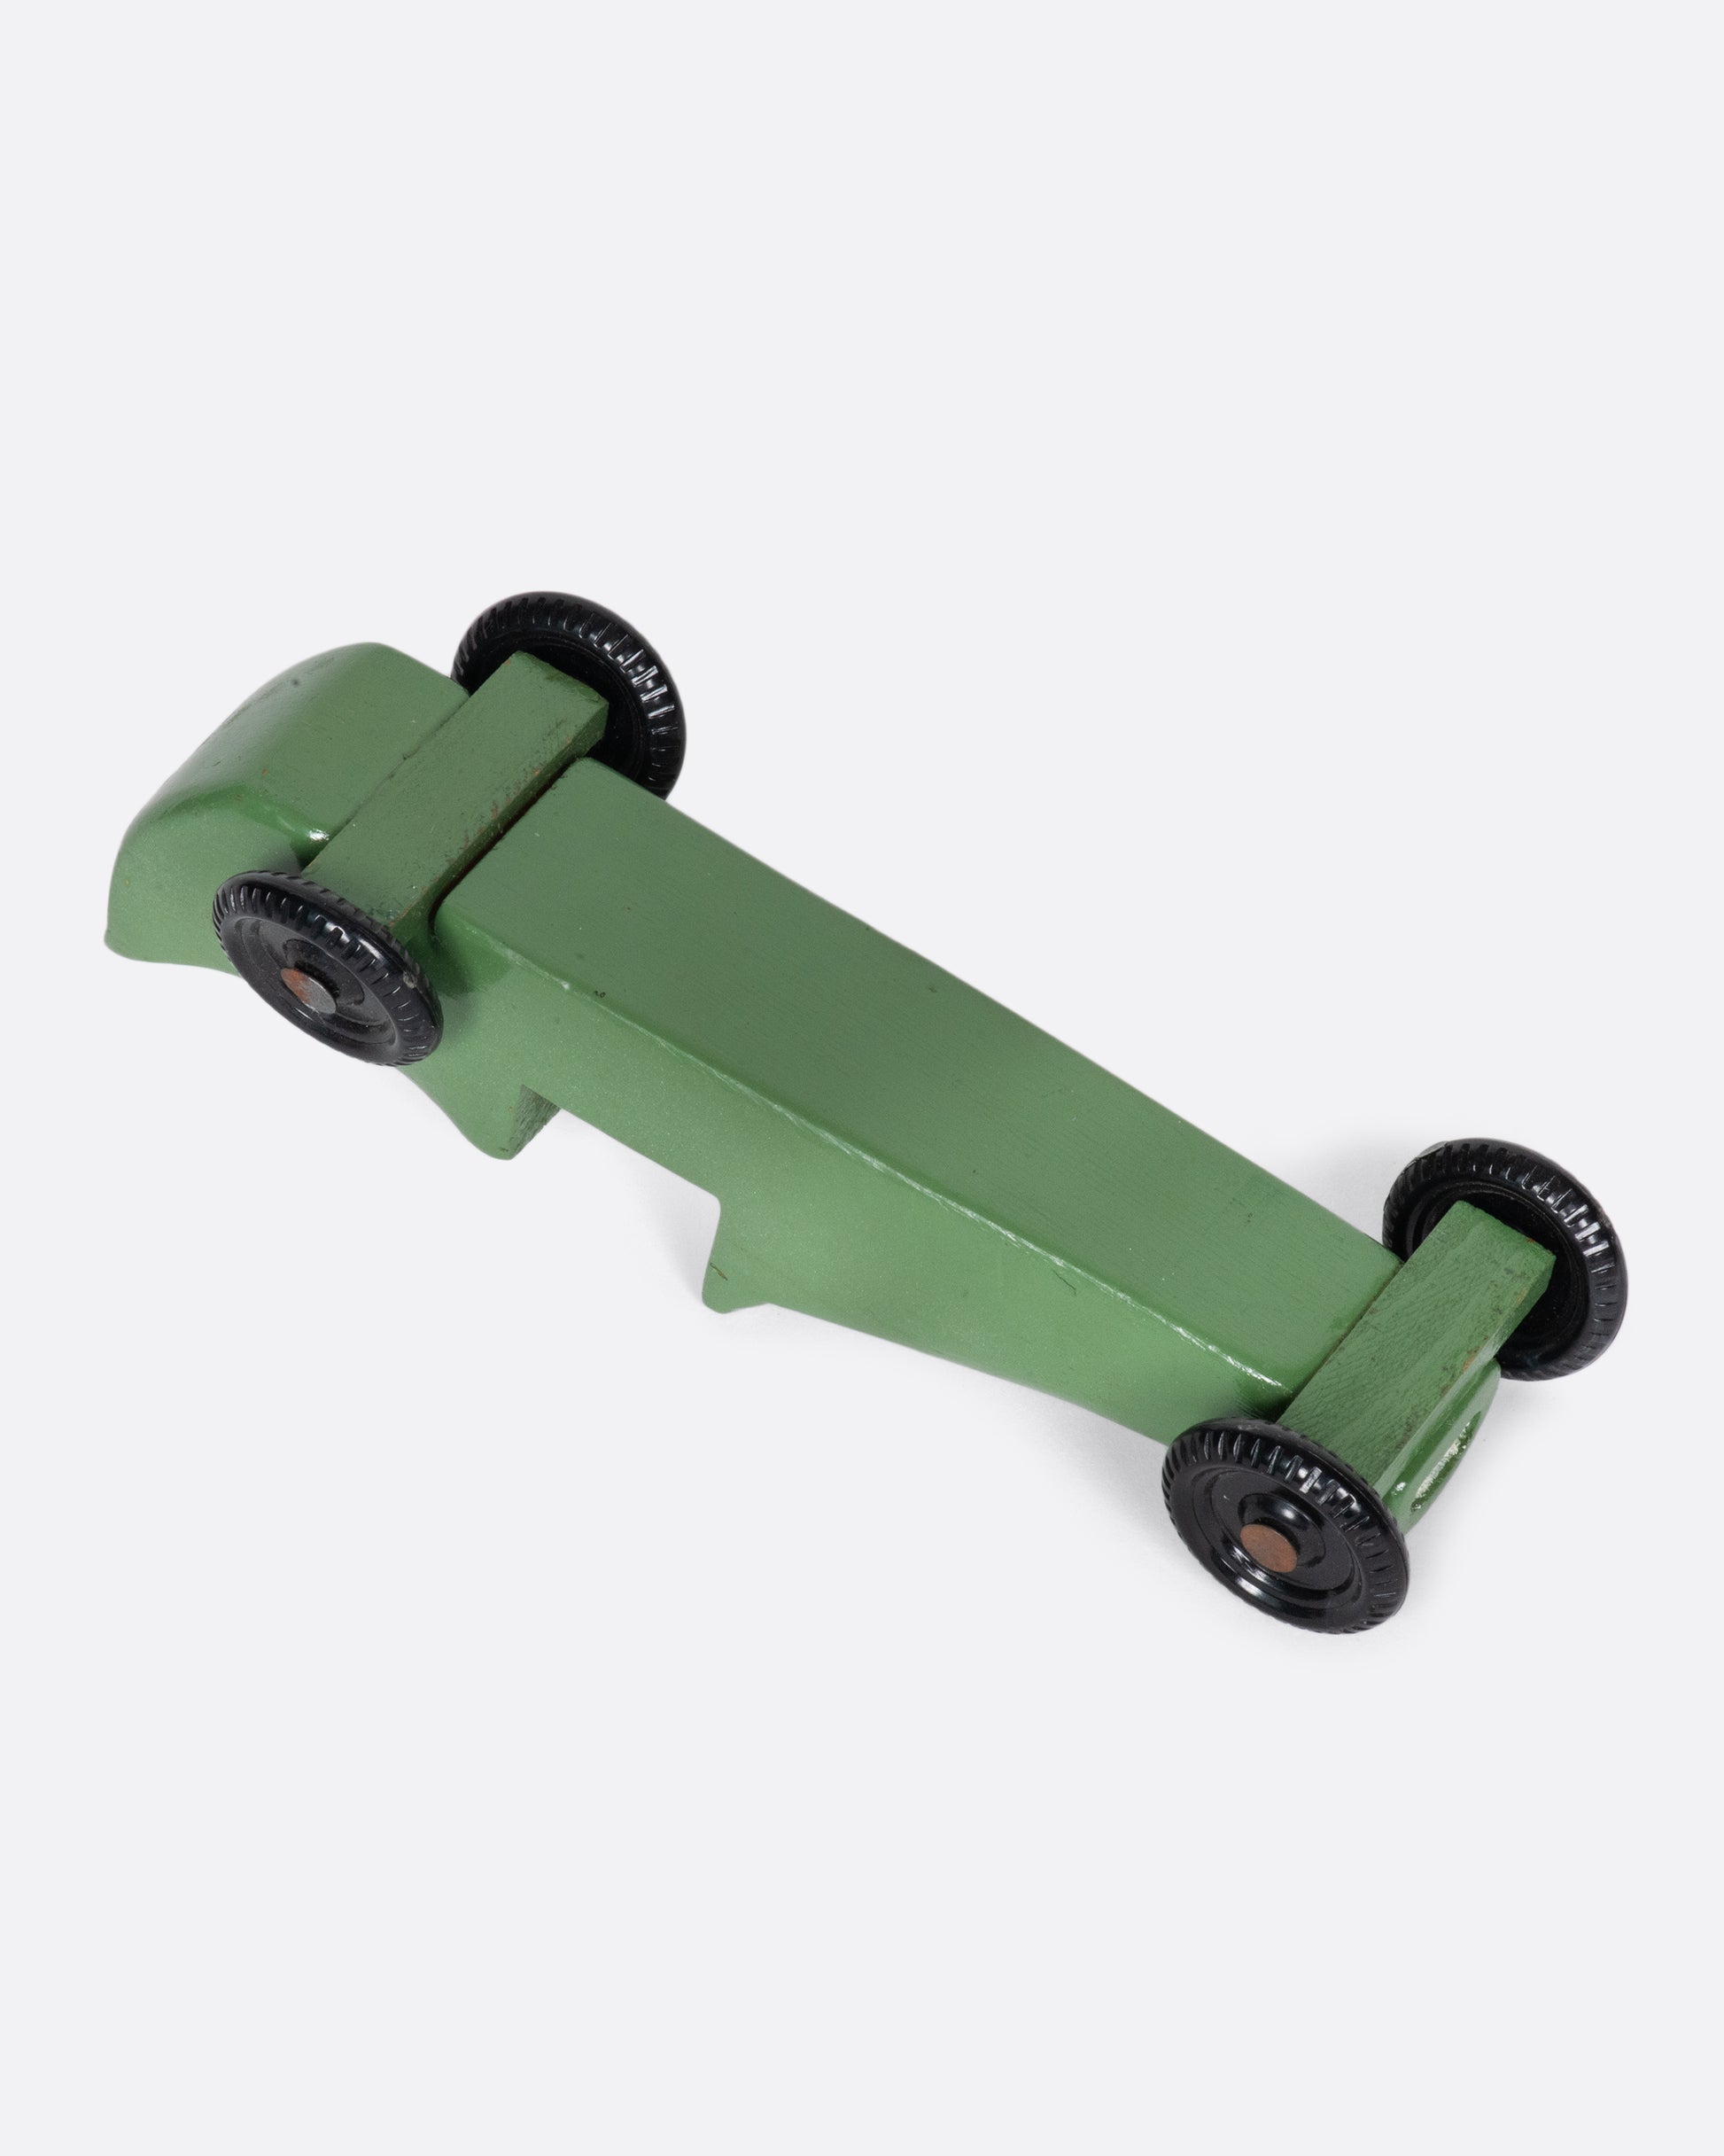 A green wooden toy car with a racing stripe.